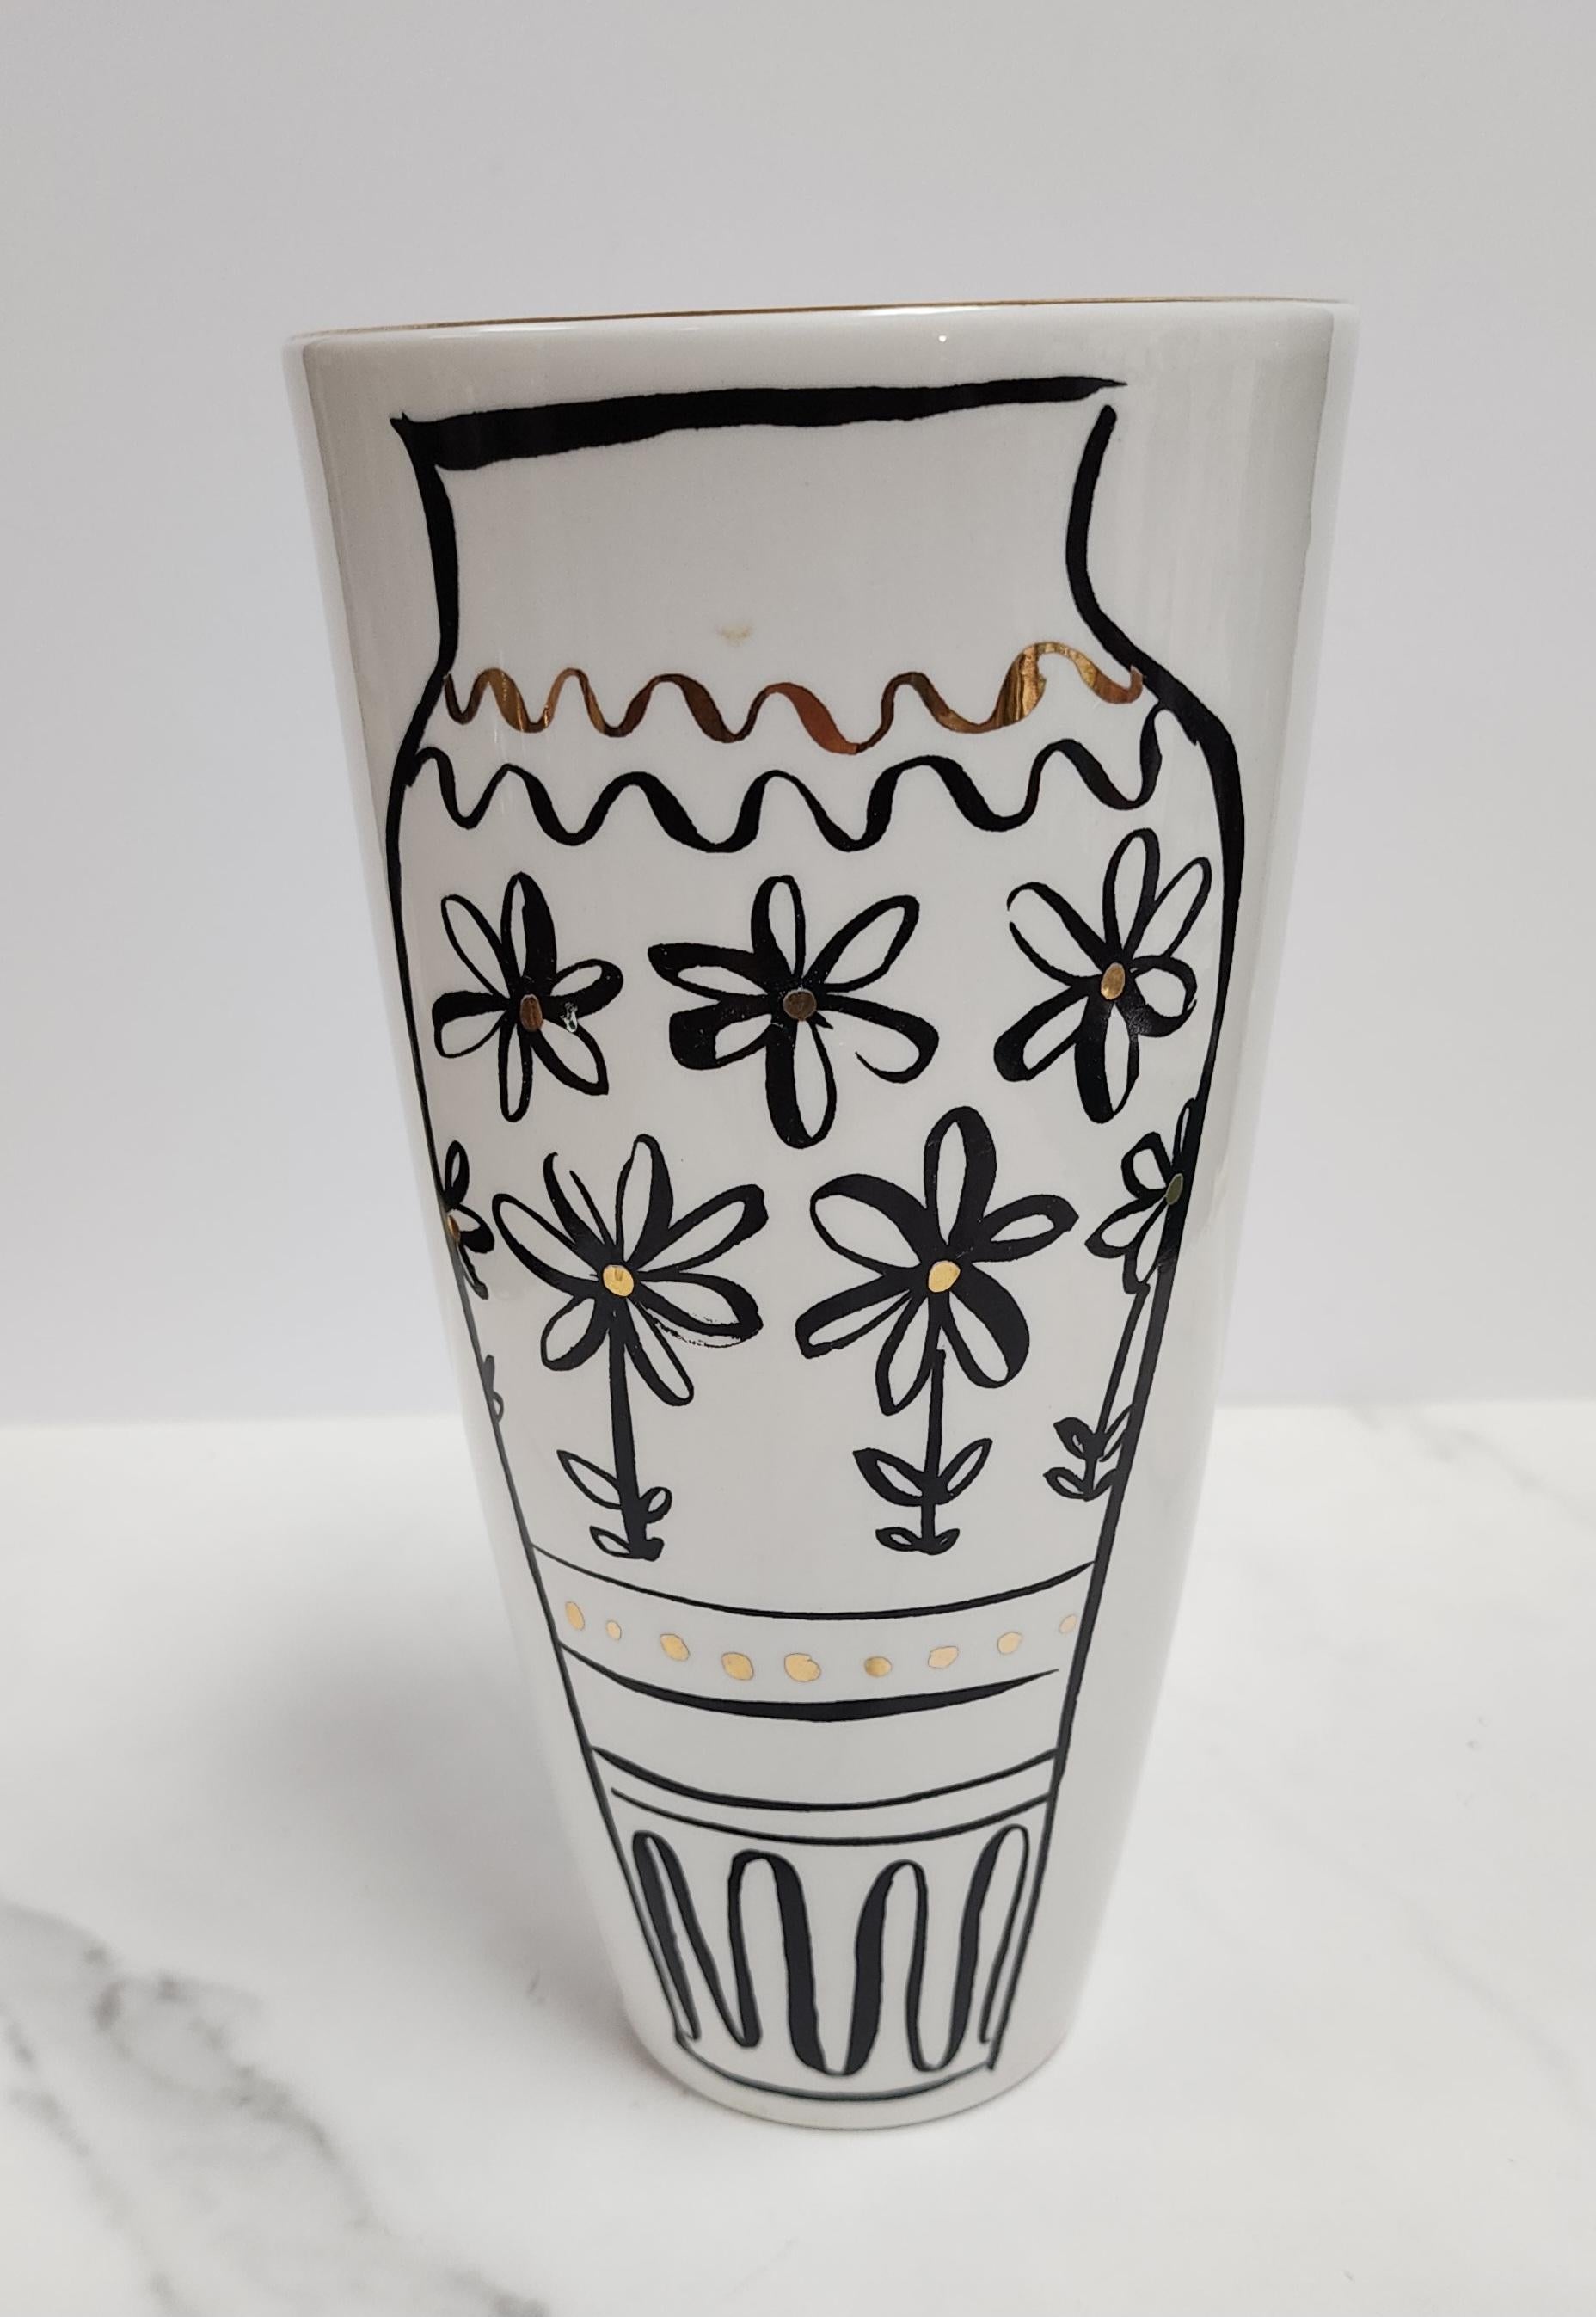 Kate Spade for Lenox Chinoiserie Vase In Good Condition For Sale In Frederick, MD